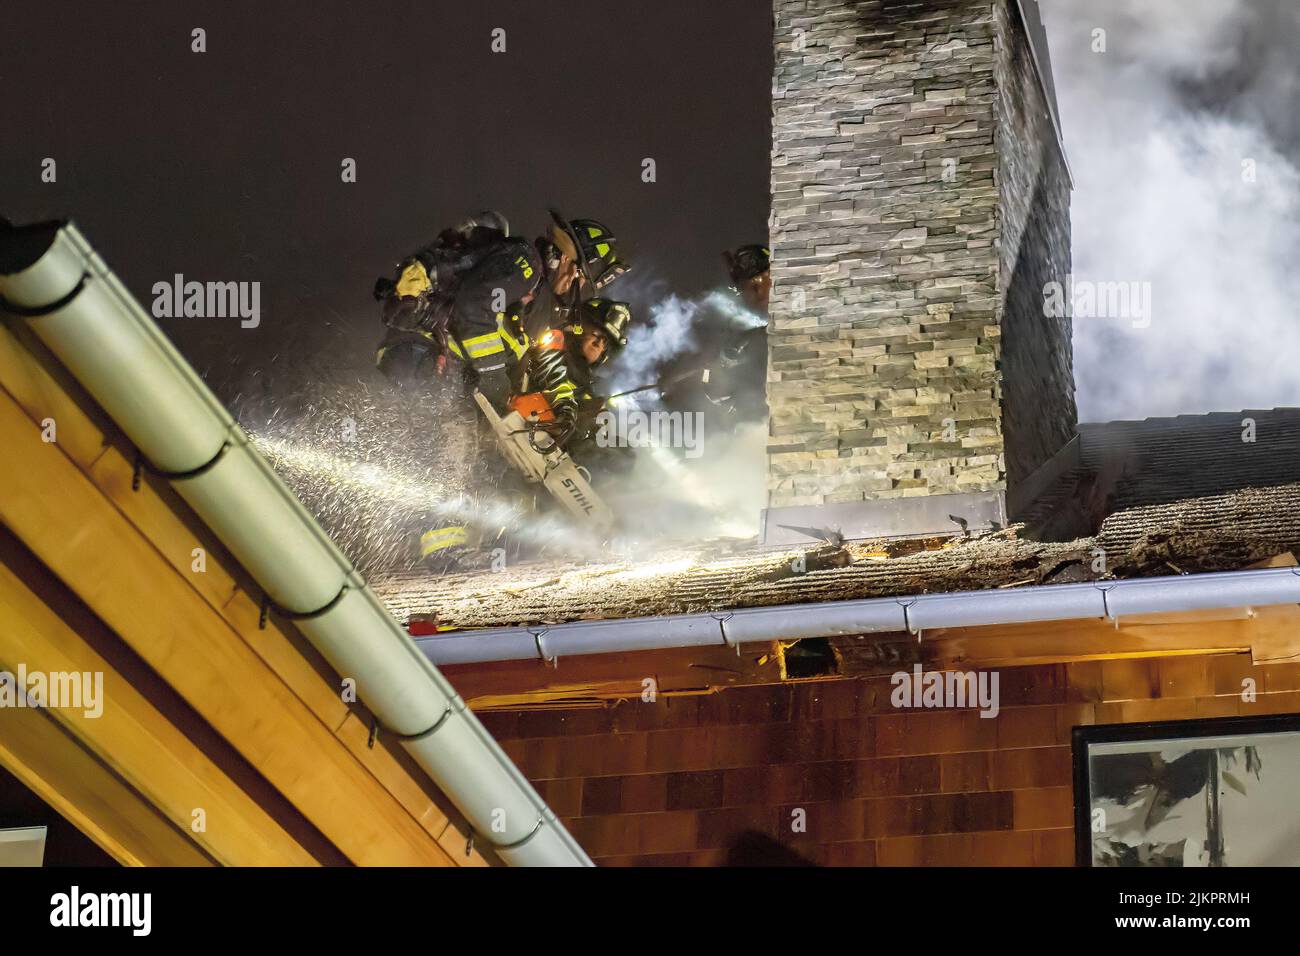 East Hampton firefighters use chain saws to cut holes in the roof ('ventilate') the roof as at 12:08 a.m. on Monday morning, 11/30/20, membrs of the E Stock Photo